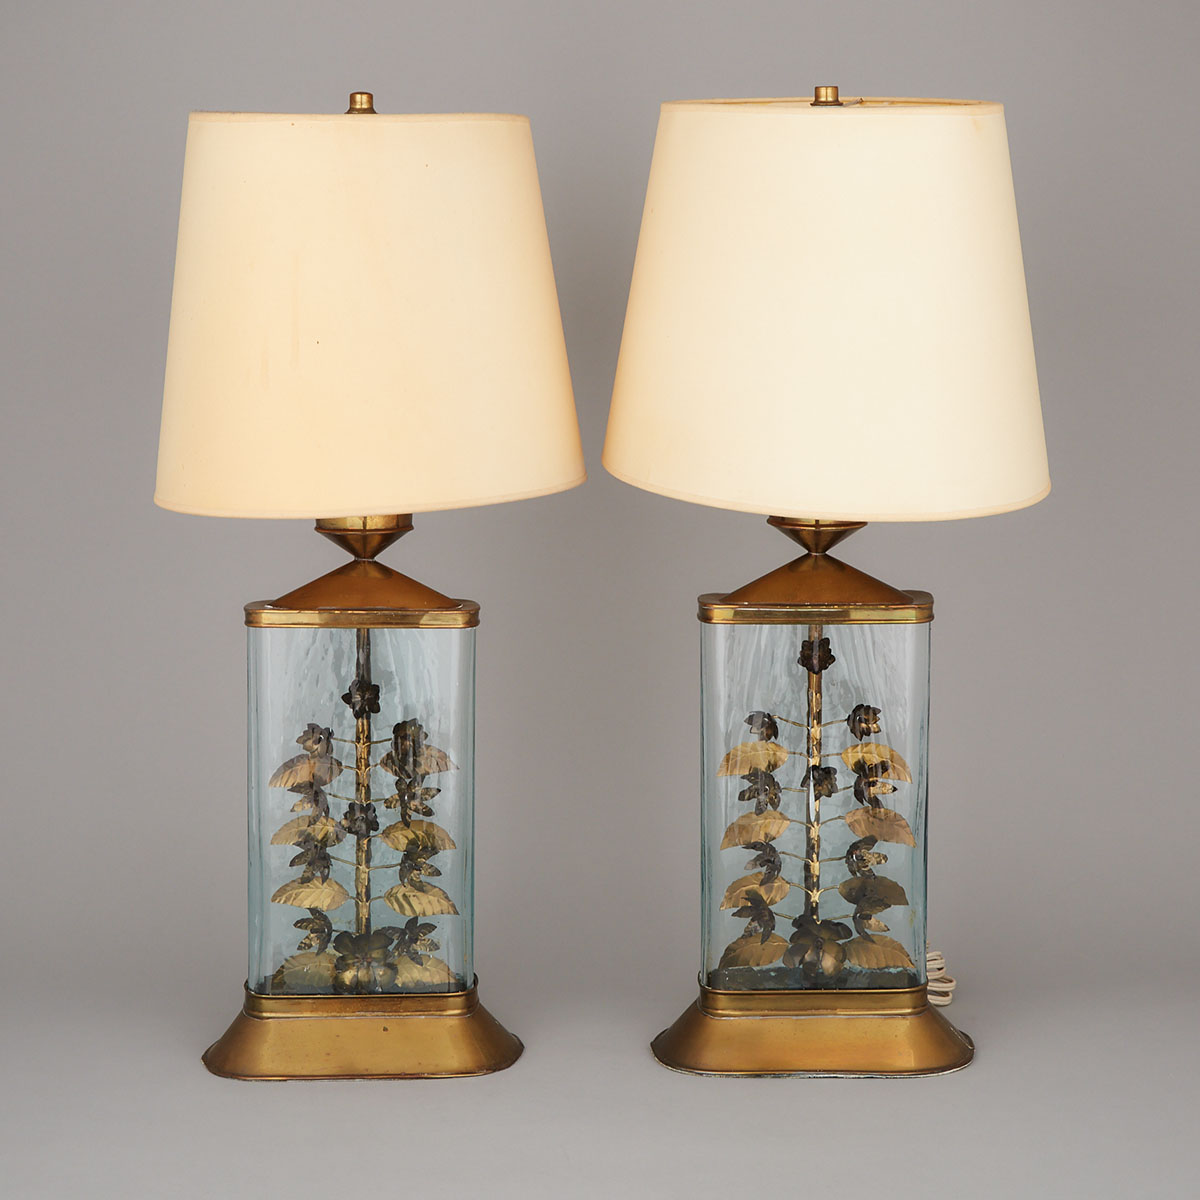 Pair of Brass and Glass Table Lamps by Cruz, Cuernavaca, Morelos, Mexico, mid 20th century